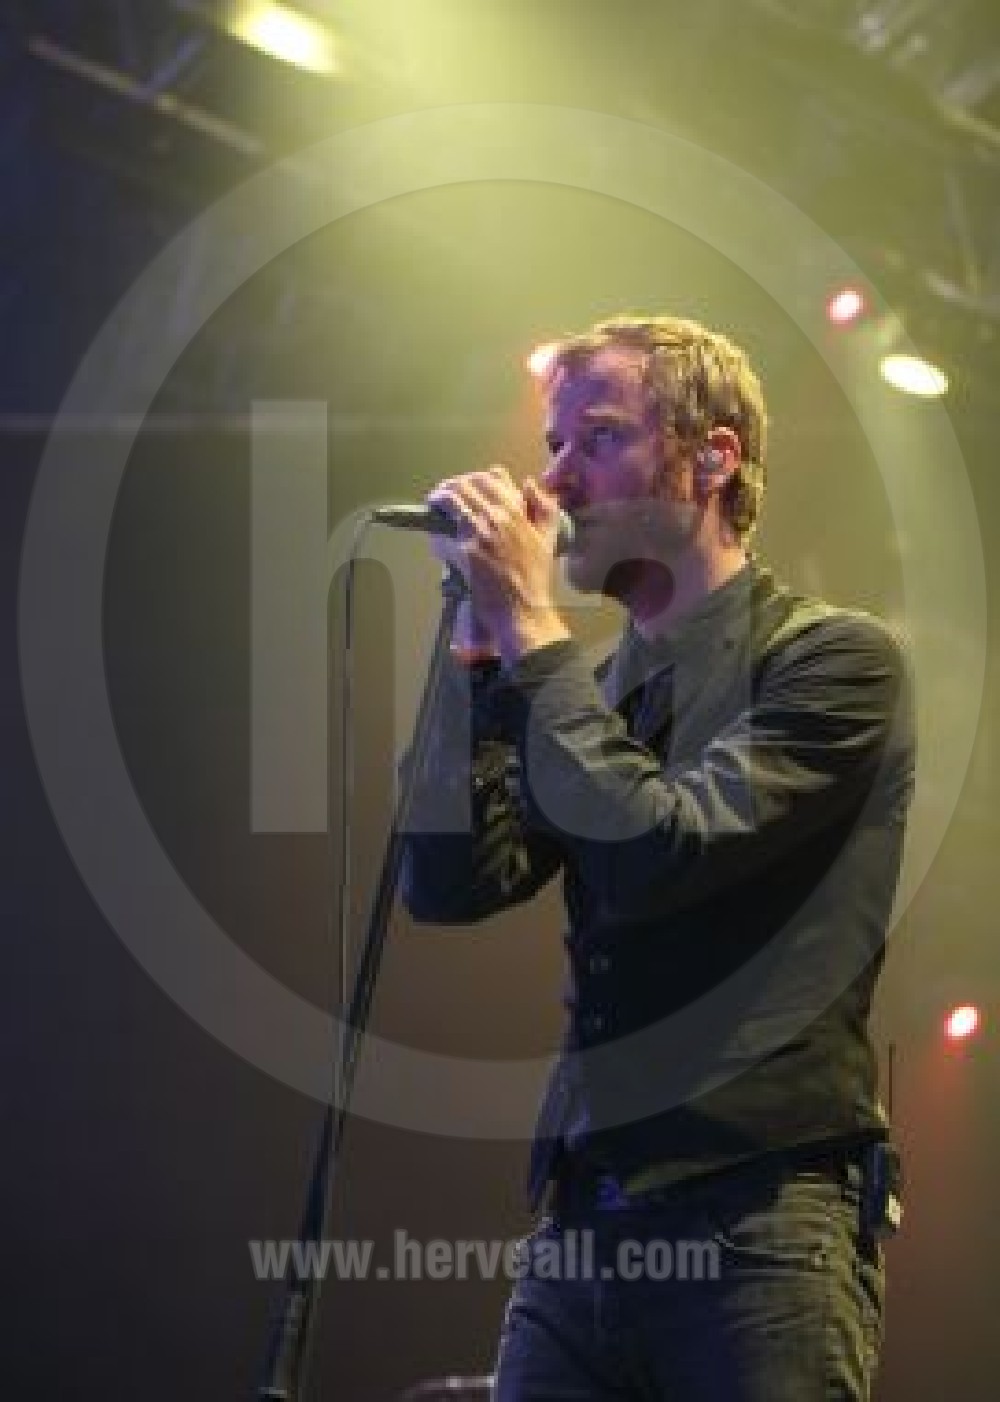 The national